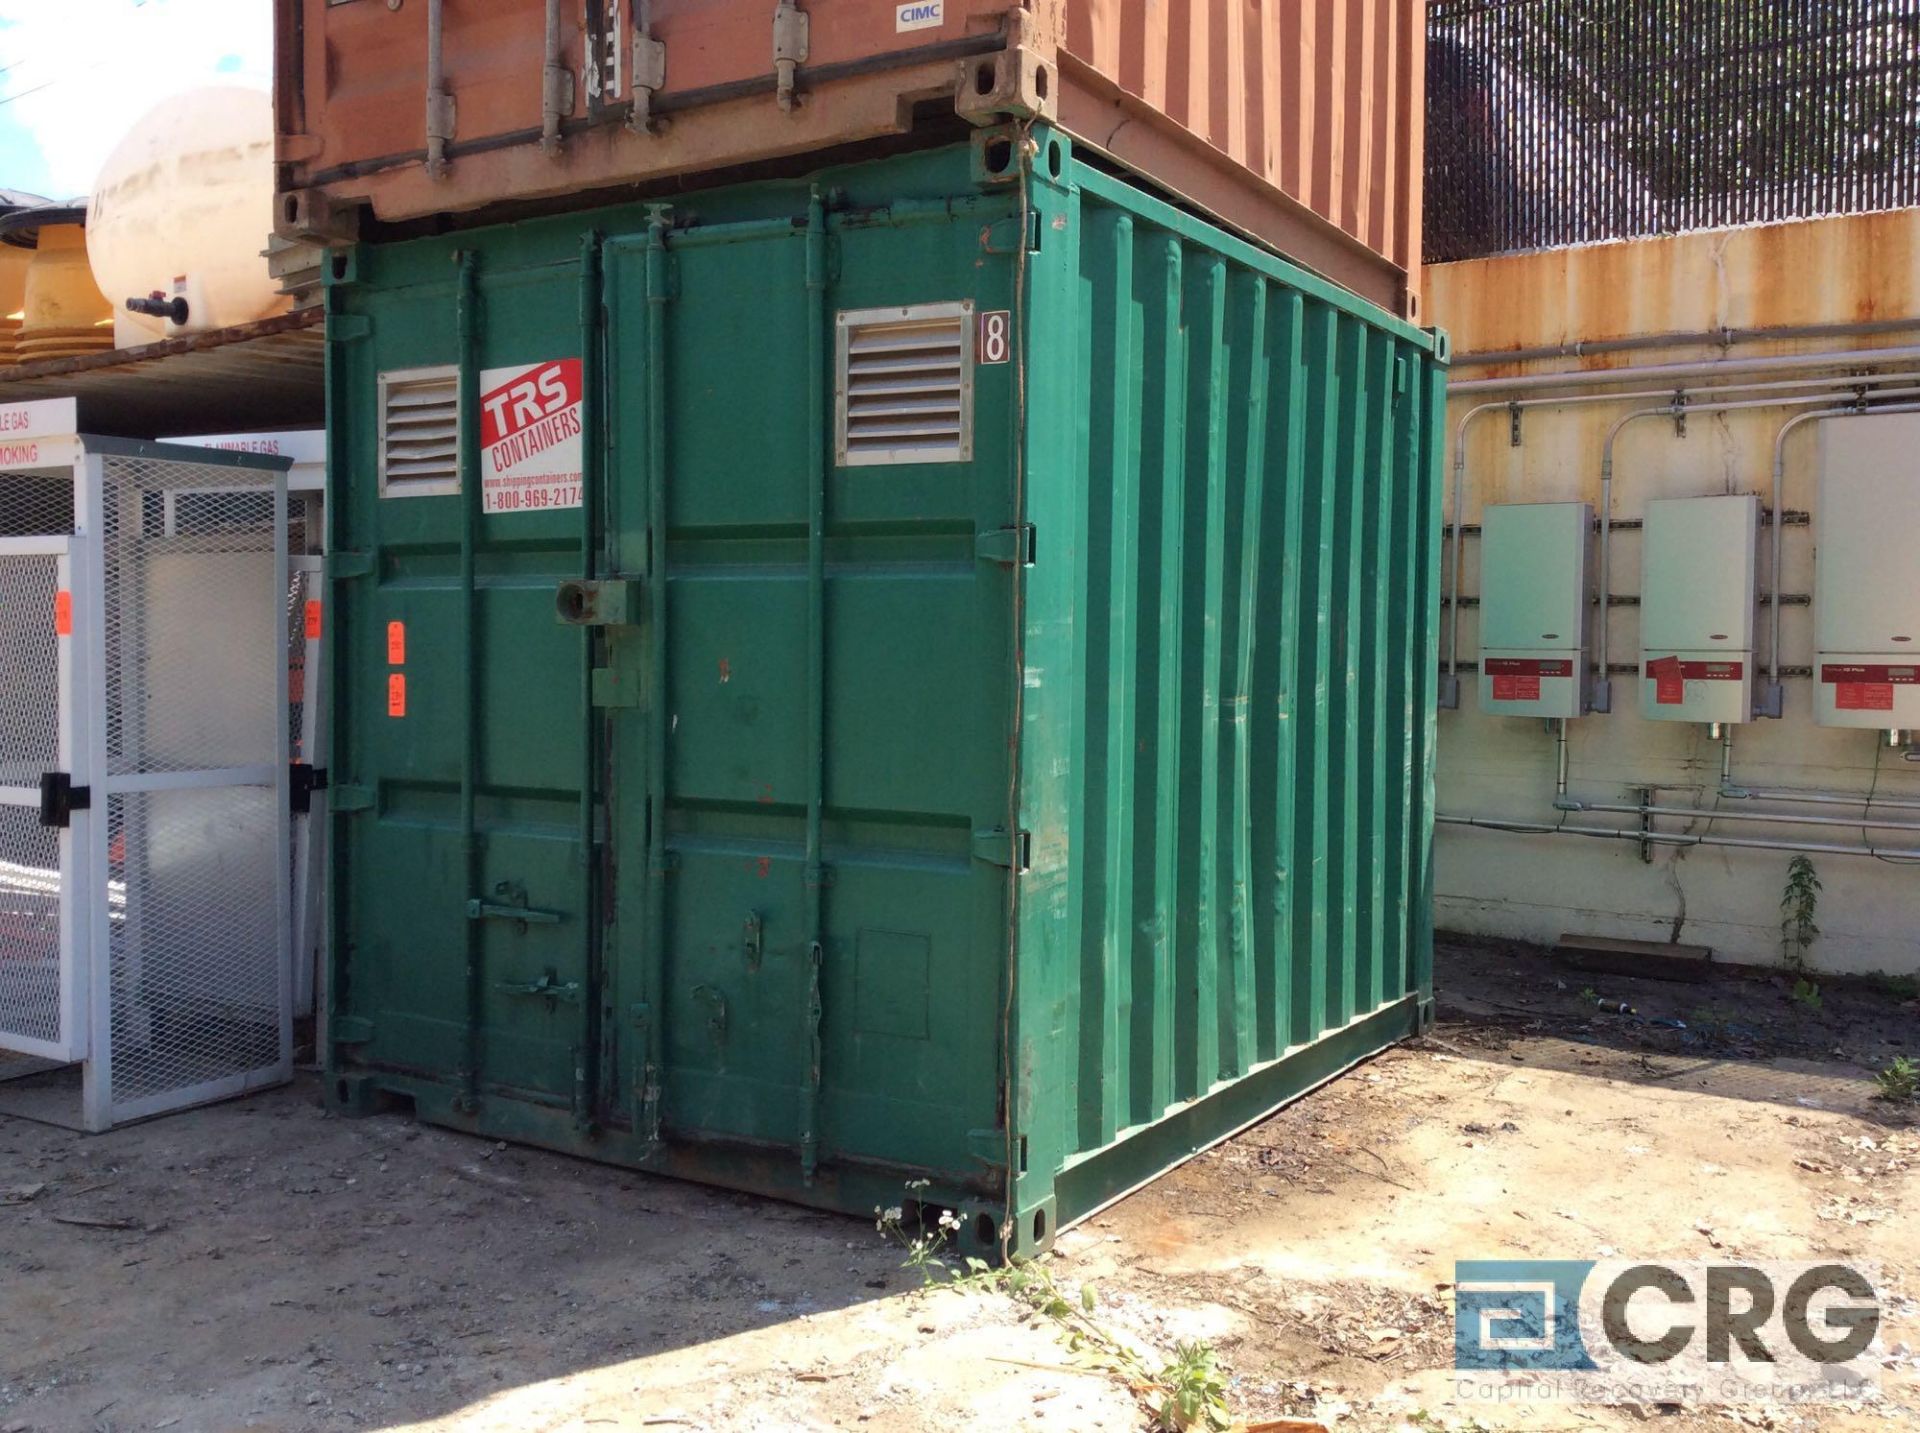 10' X 8' X 8' 6" steel dry shipping container with 500 gallon fuel tank